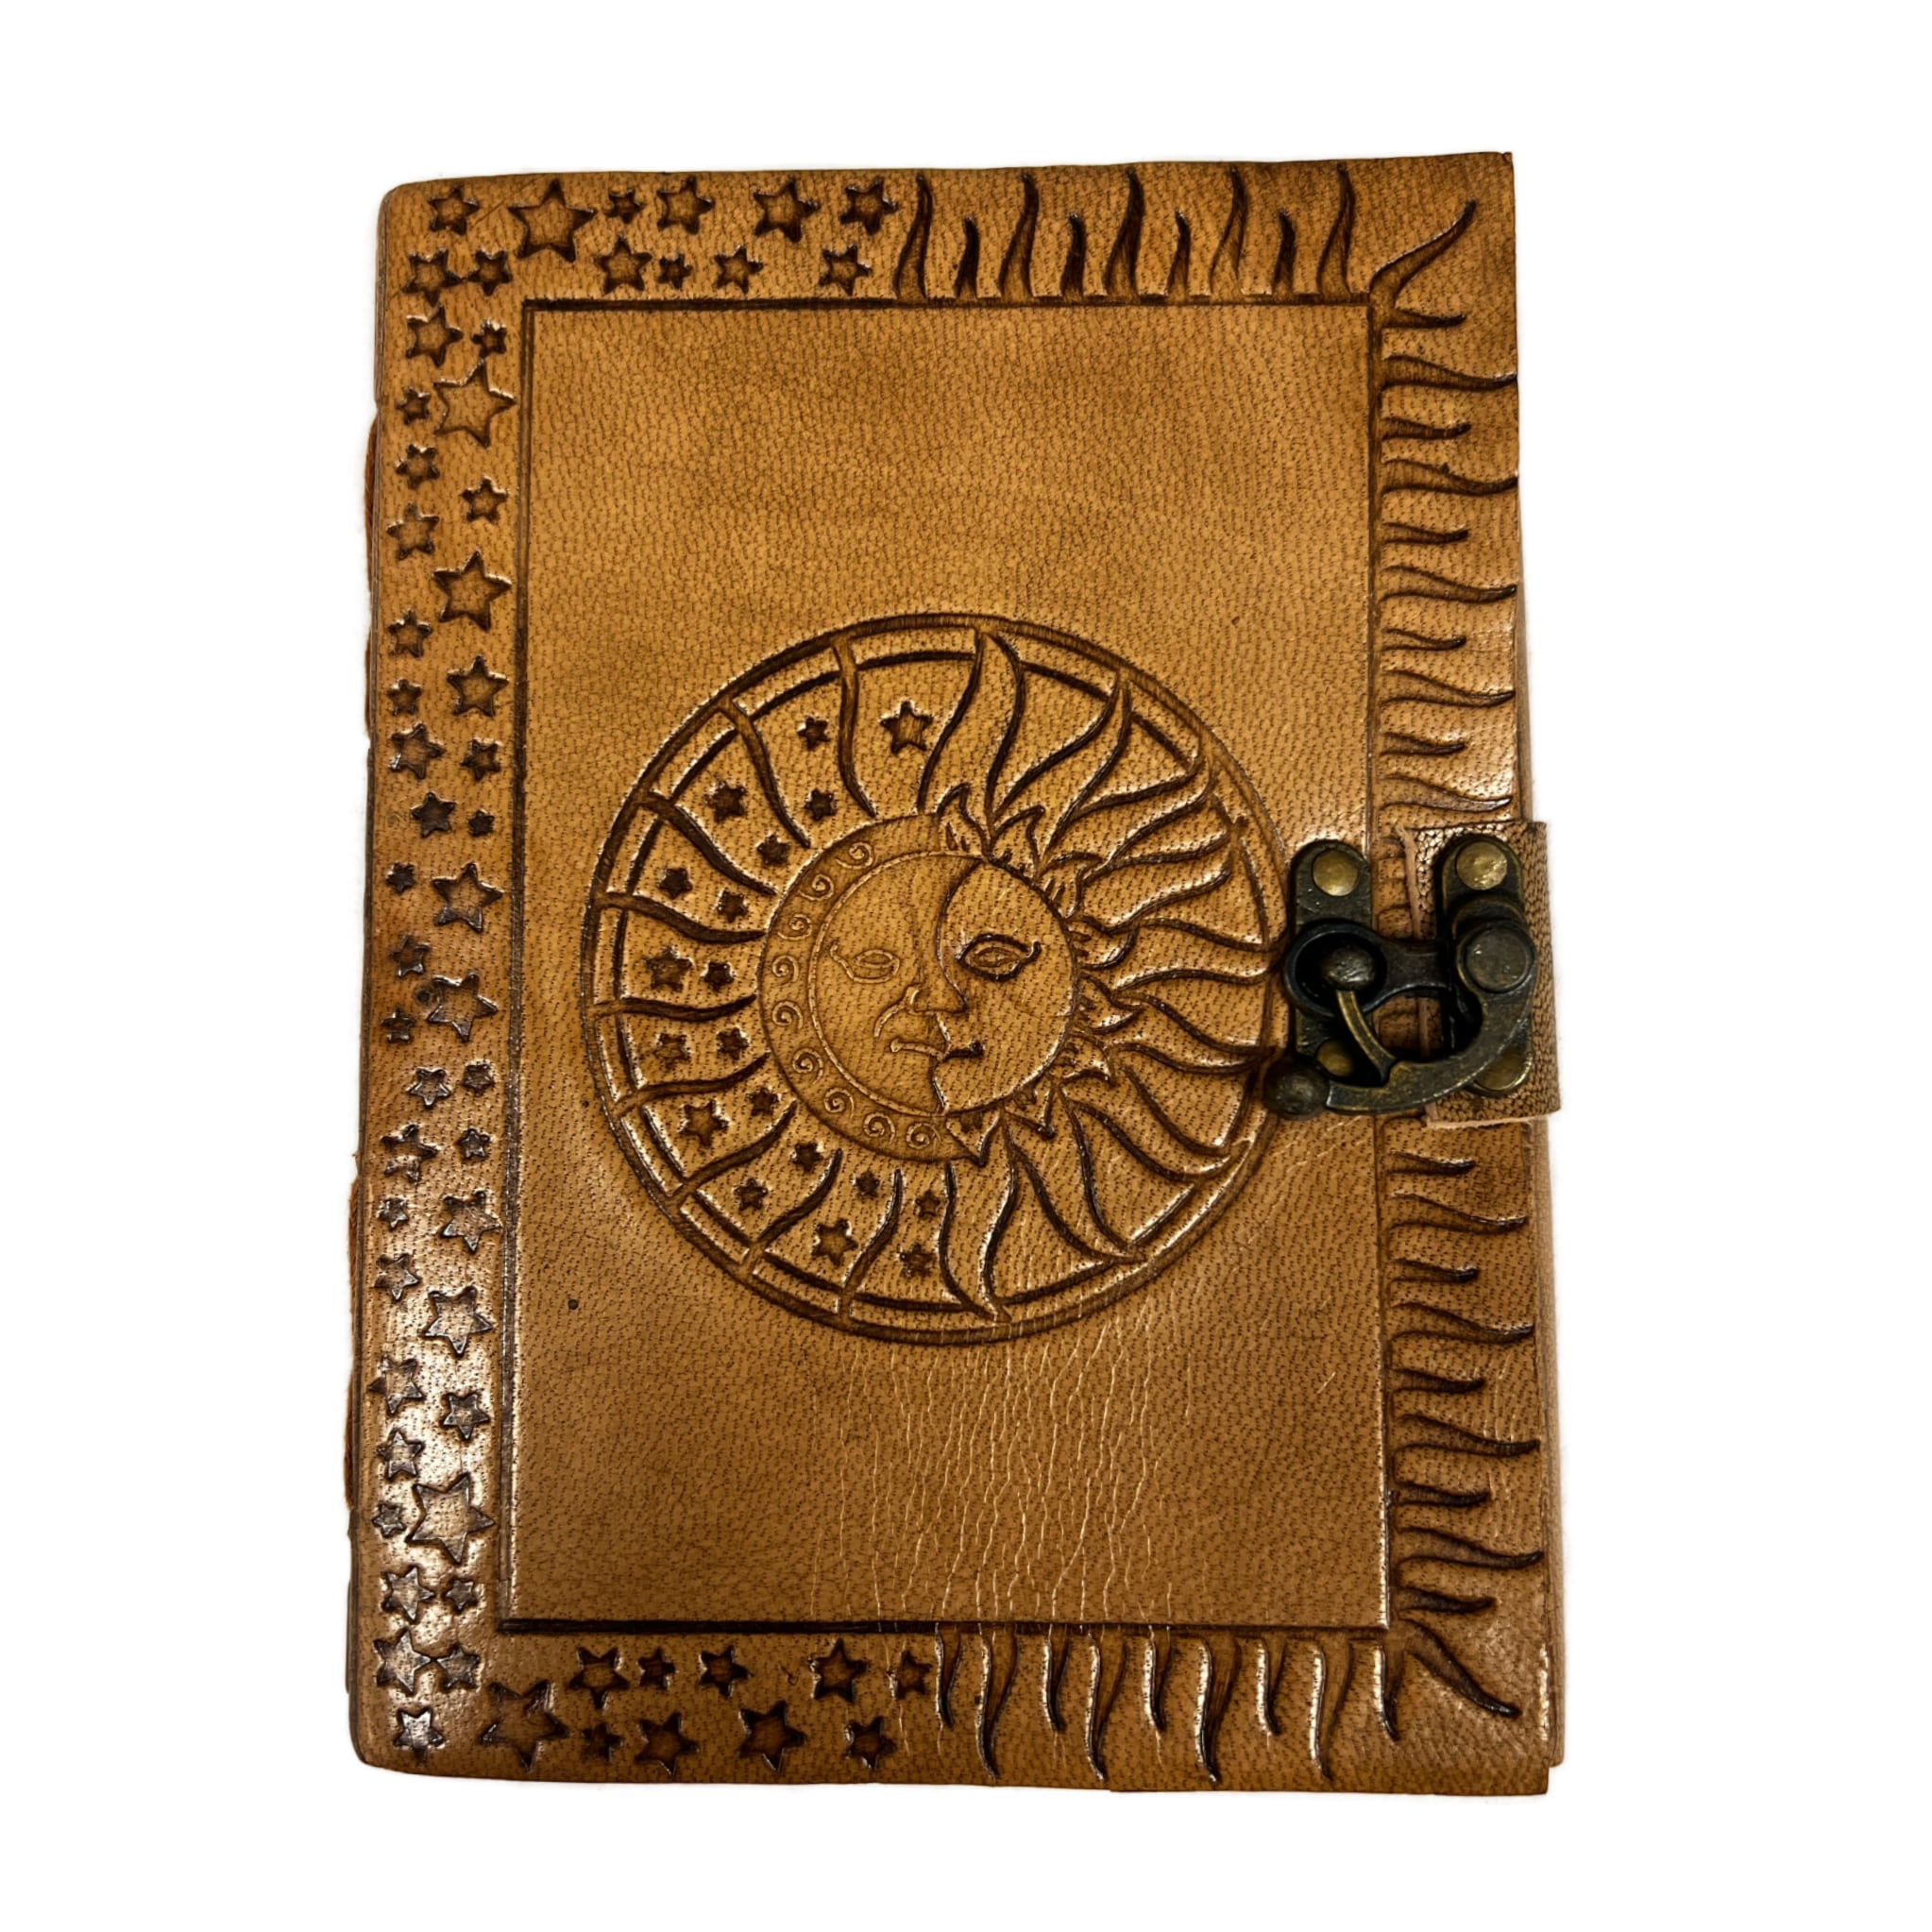 Leather book sun nd moon embossed 